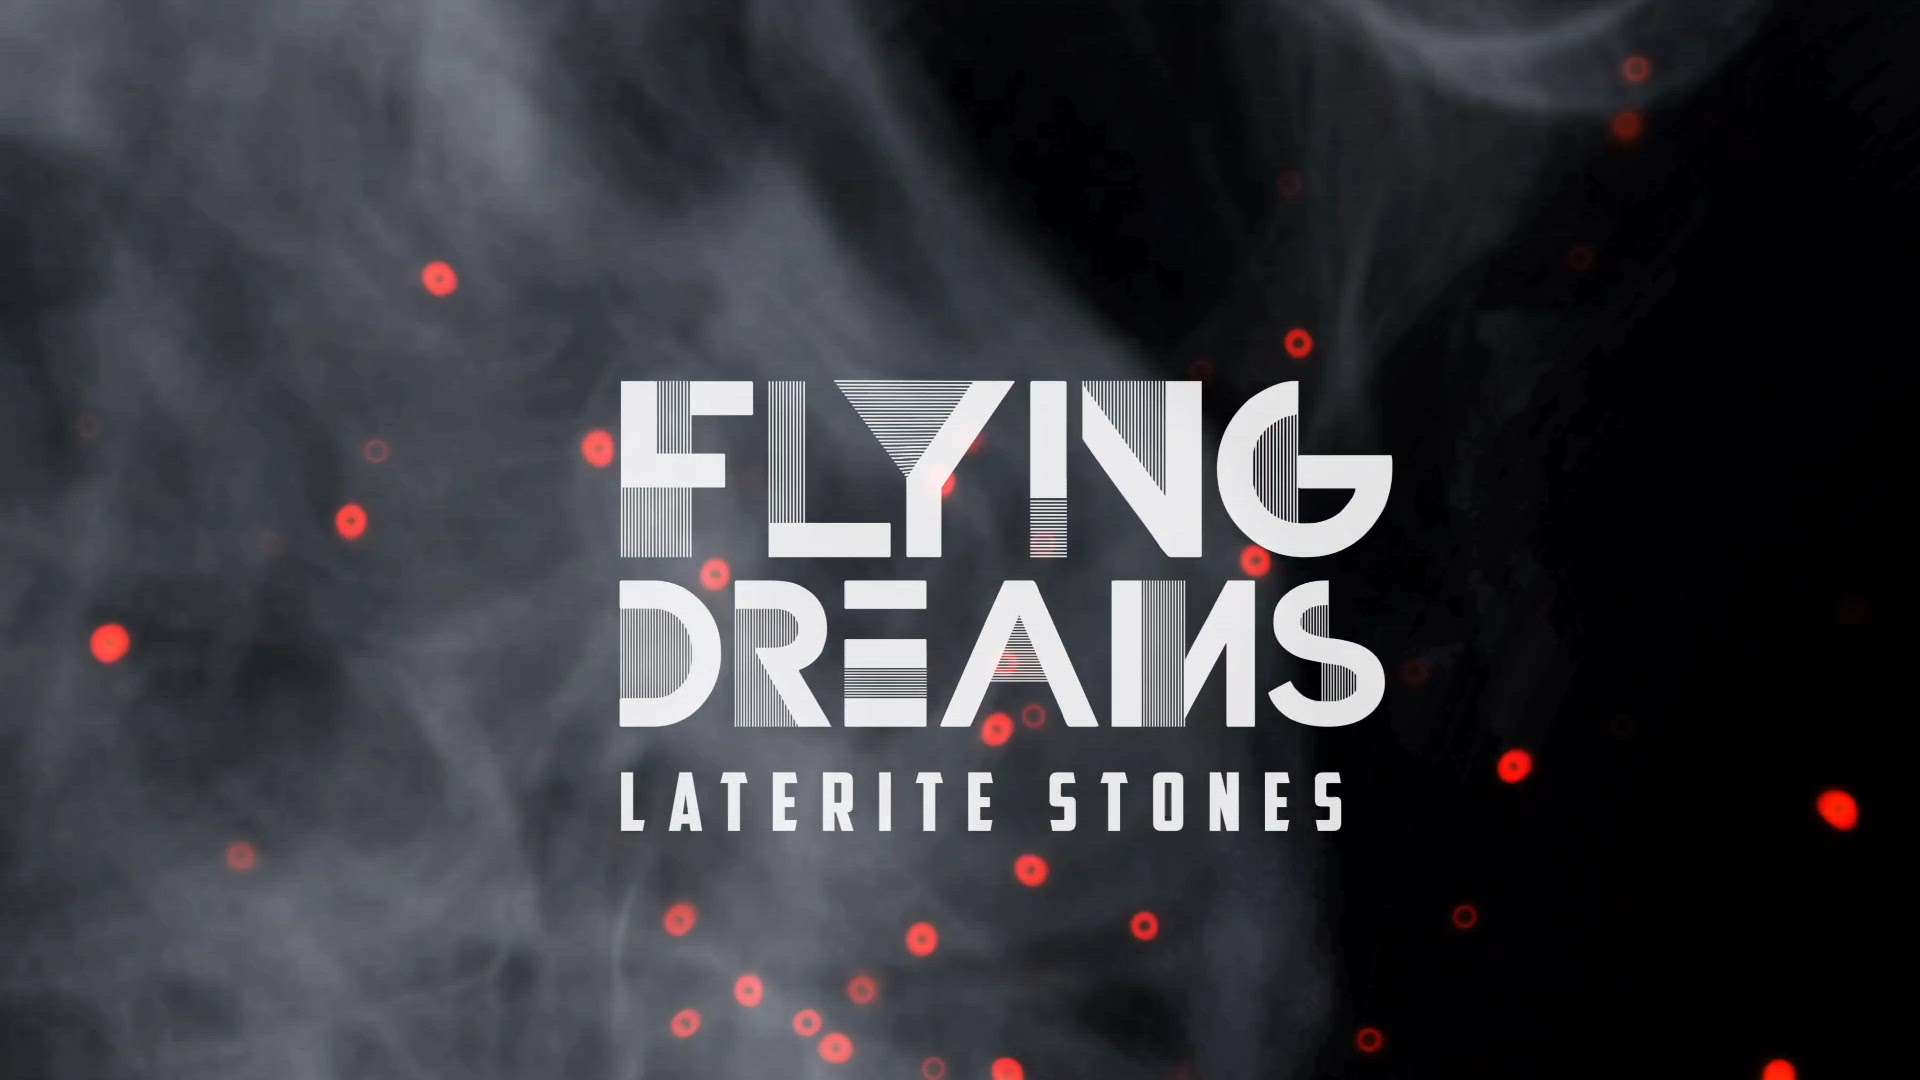 Flying Dreams Laterite Stones & Laterite Tiles All India Distribution ♨️
.
.
 #KeralaStyleHouse  #keralastyle  #InteriorDesigner  #instahome  #keralahomedesignz  #budget_home_simple_interi  #budgethomes  #HouseDesigns  #HomeAutomation  #homesweethome  #homeandinterior  #indianarchitecturel  #Architectural&nterior  #architectsinkerala  #SmallHomePlans